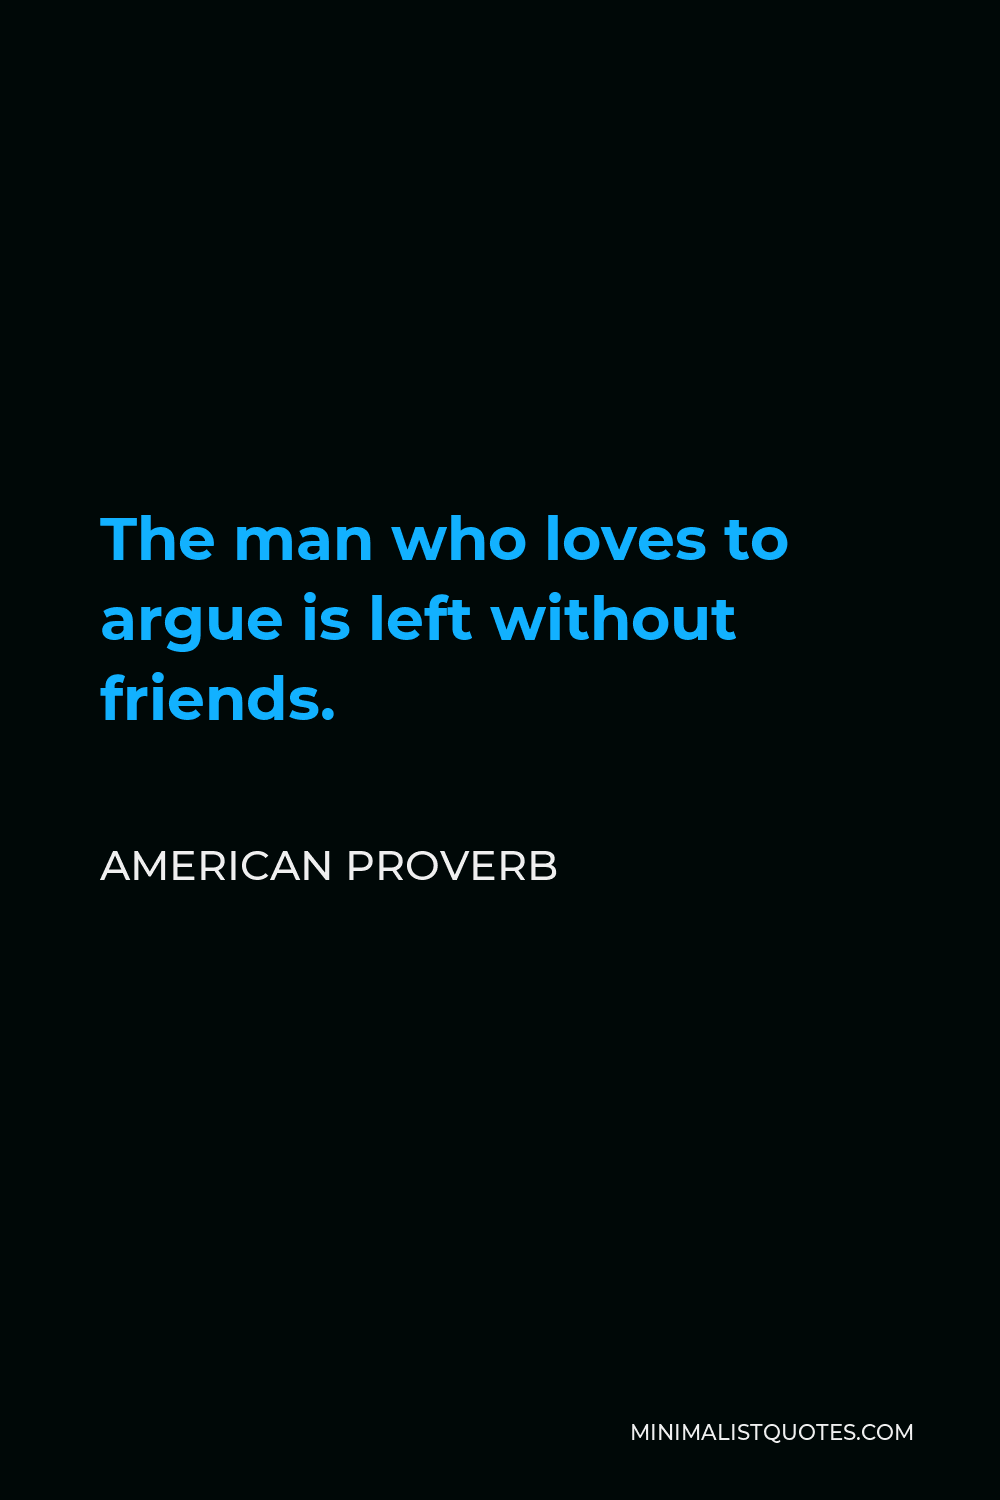 American Proverb Quote - The man who loves to argue is left without friends.